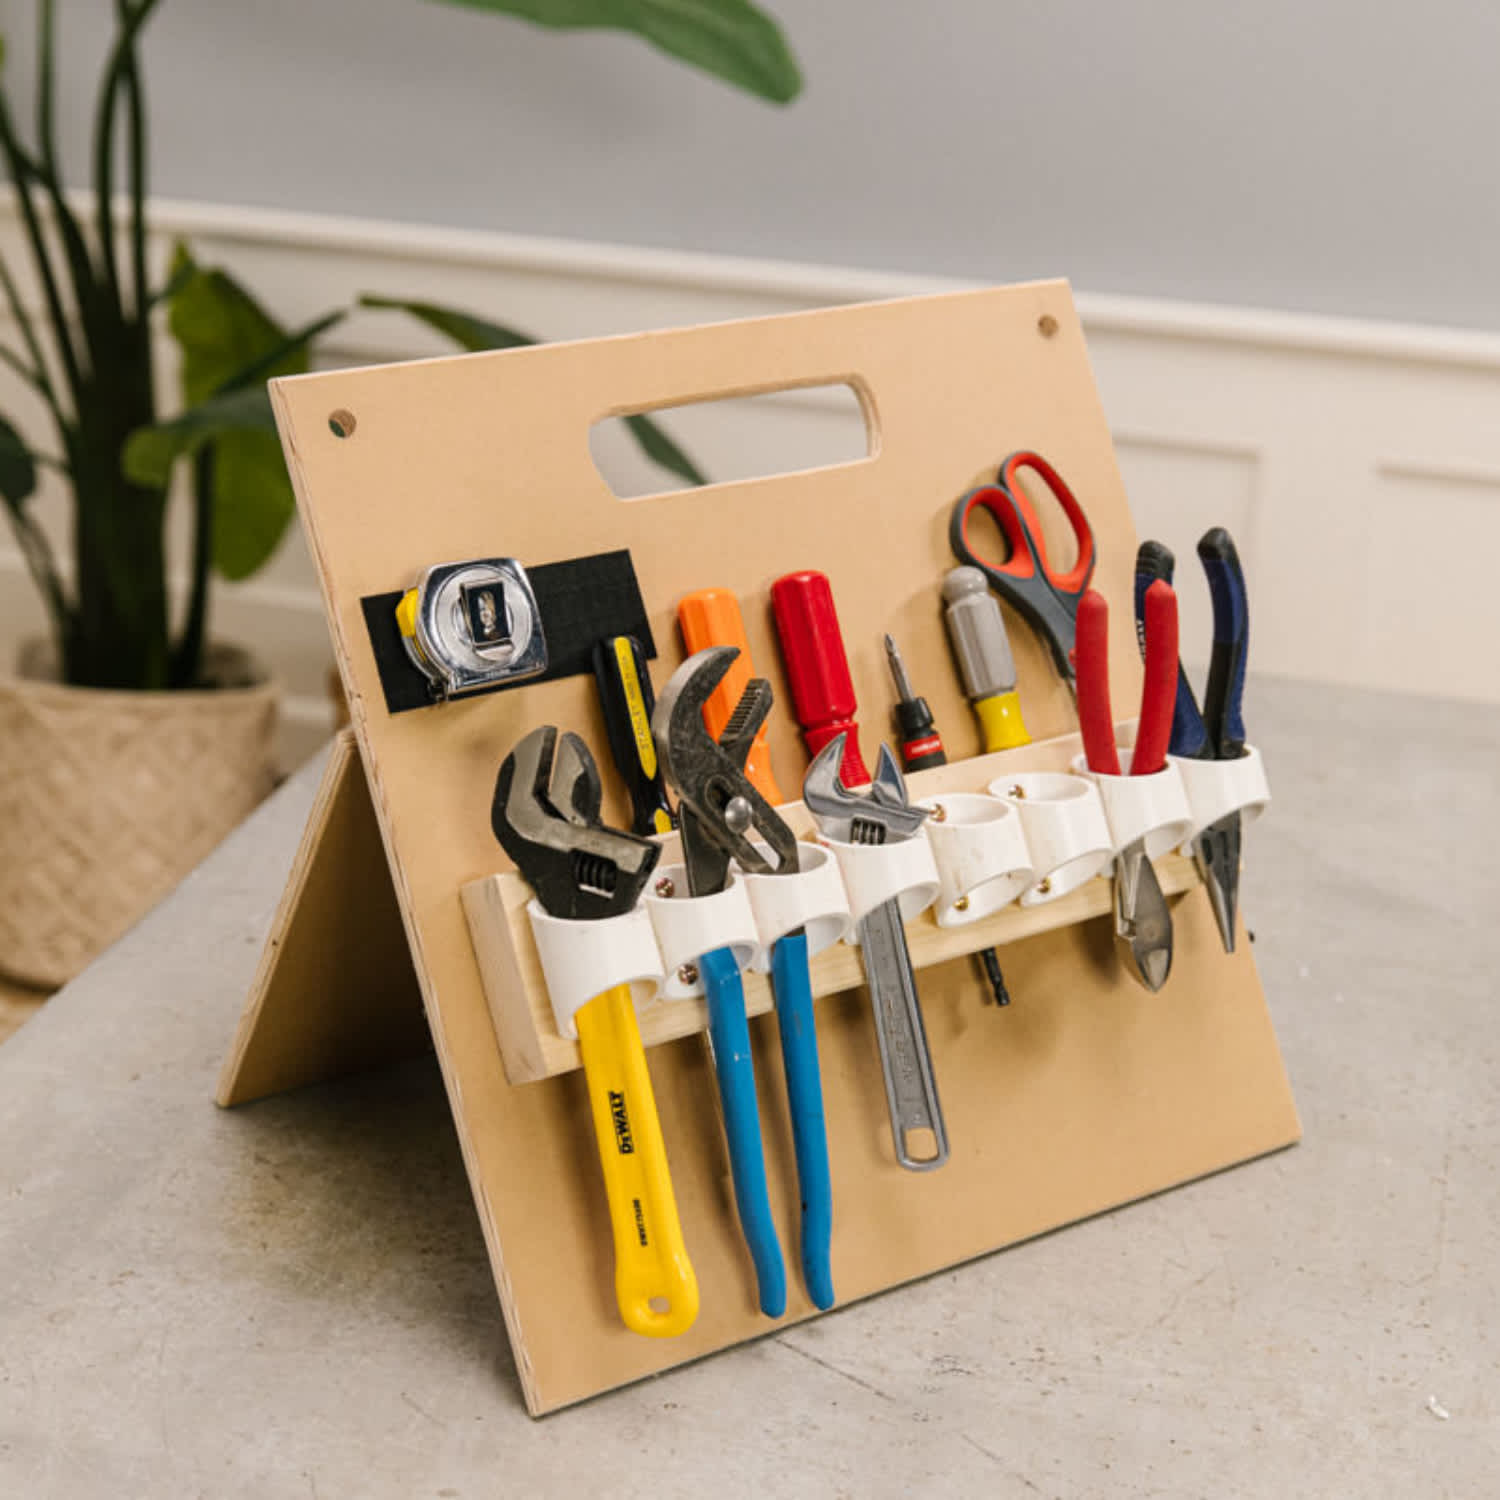 The Best Garden Tools For Small Apartments and How to Store Them